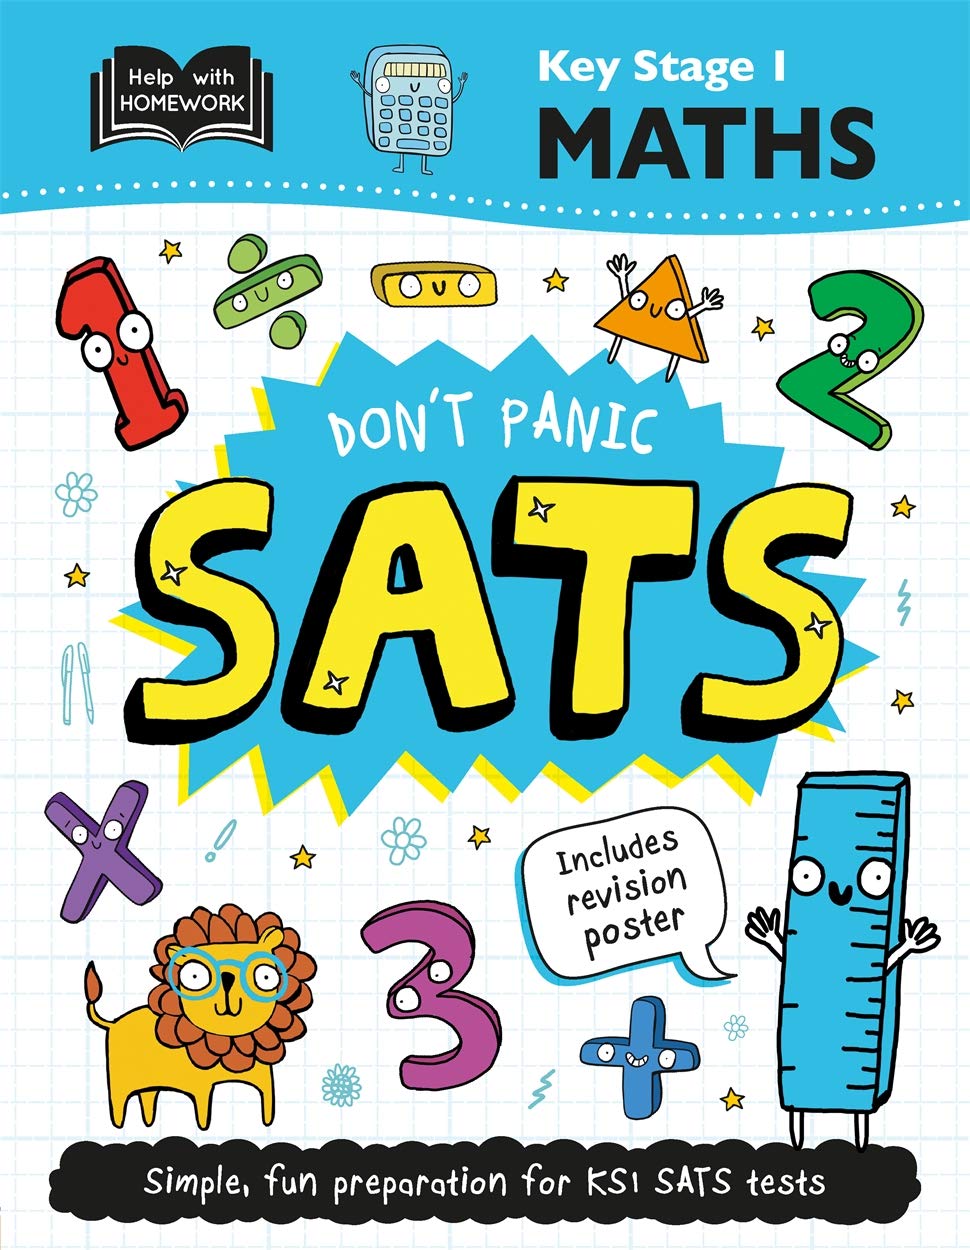 Key Stage 1 Maths: Don't Panic SATs (Help With Homework)